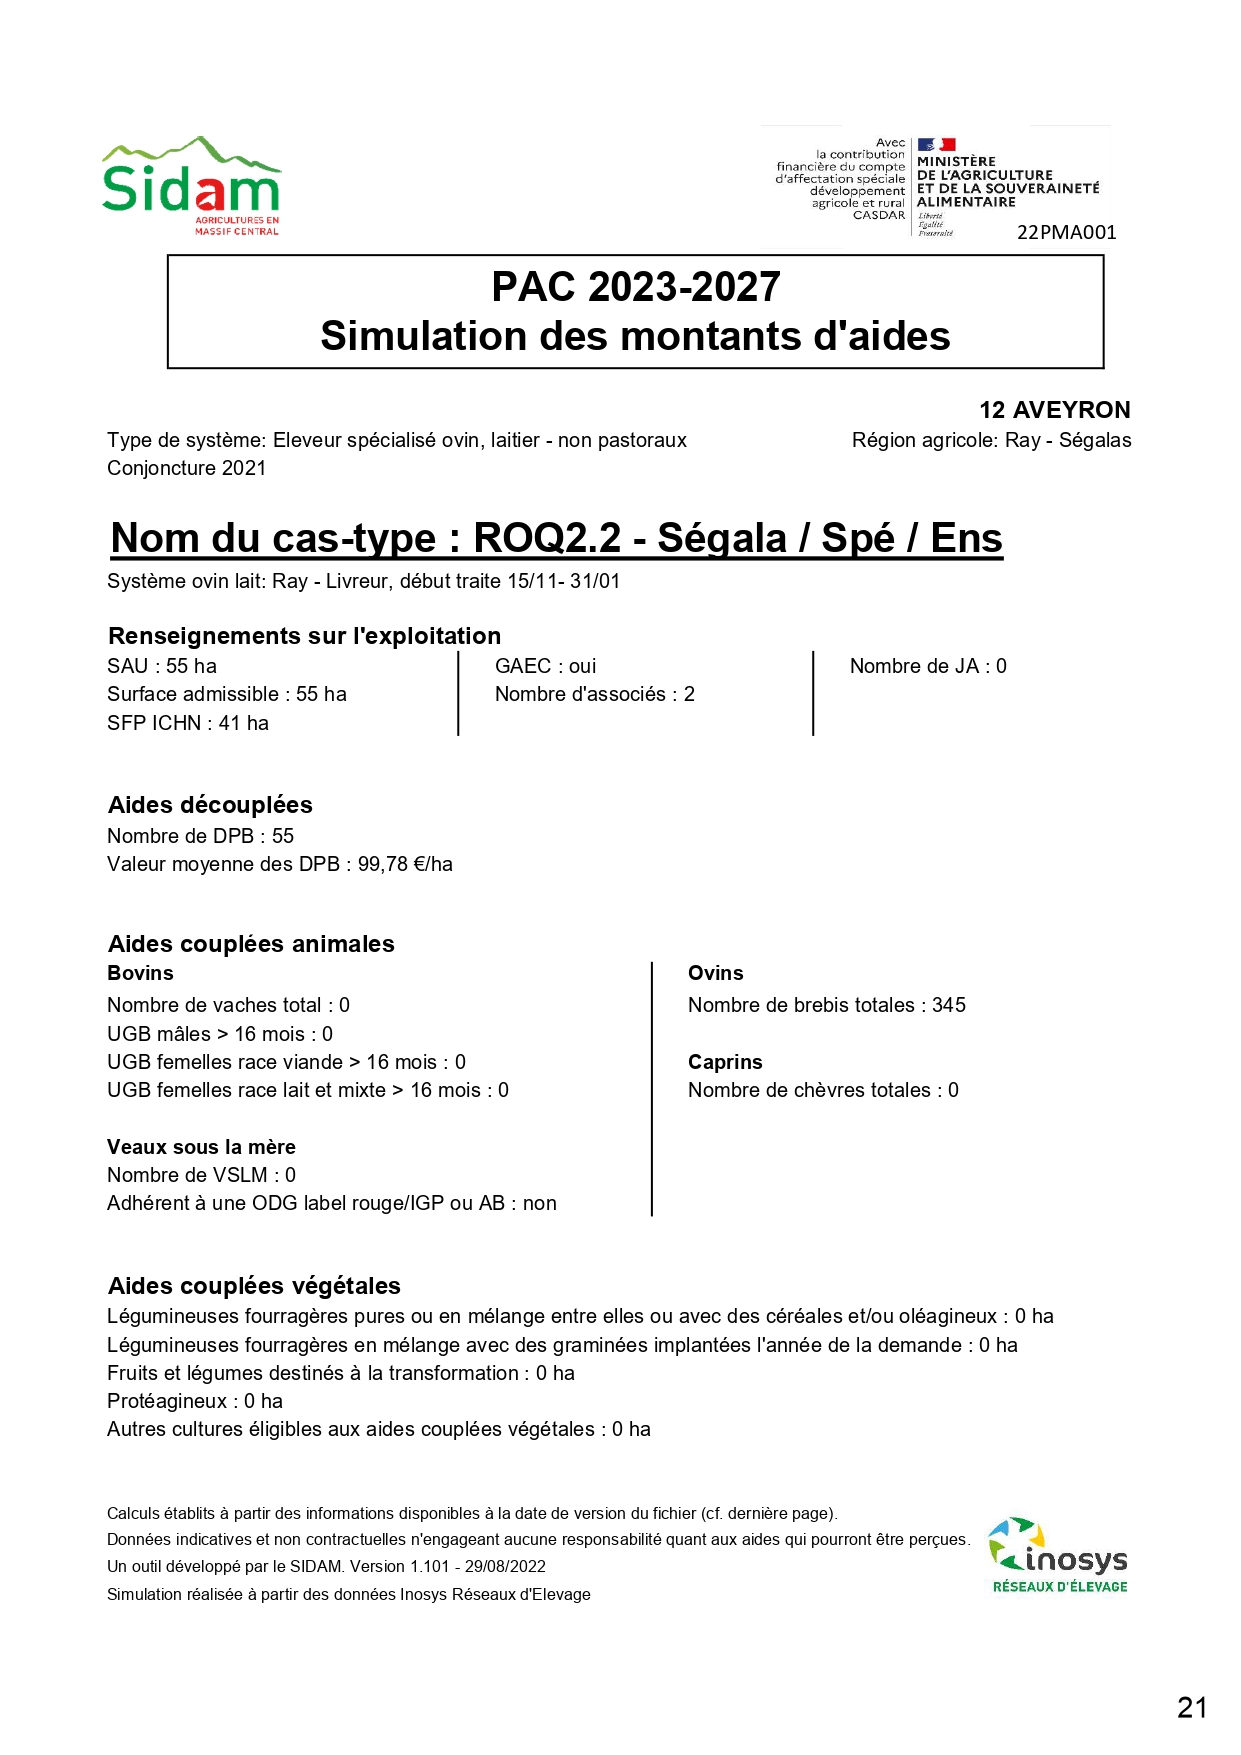 Etude impact PAC 23-27 sur castypes INOSYS-1-68_pages-to-jpg-0021